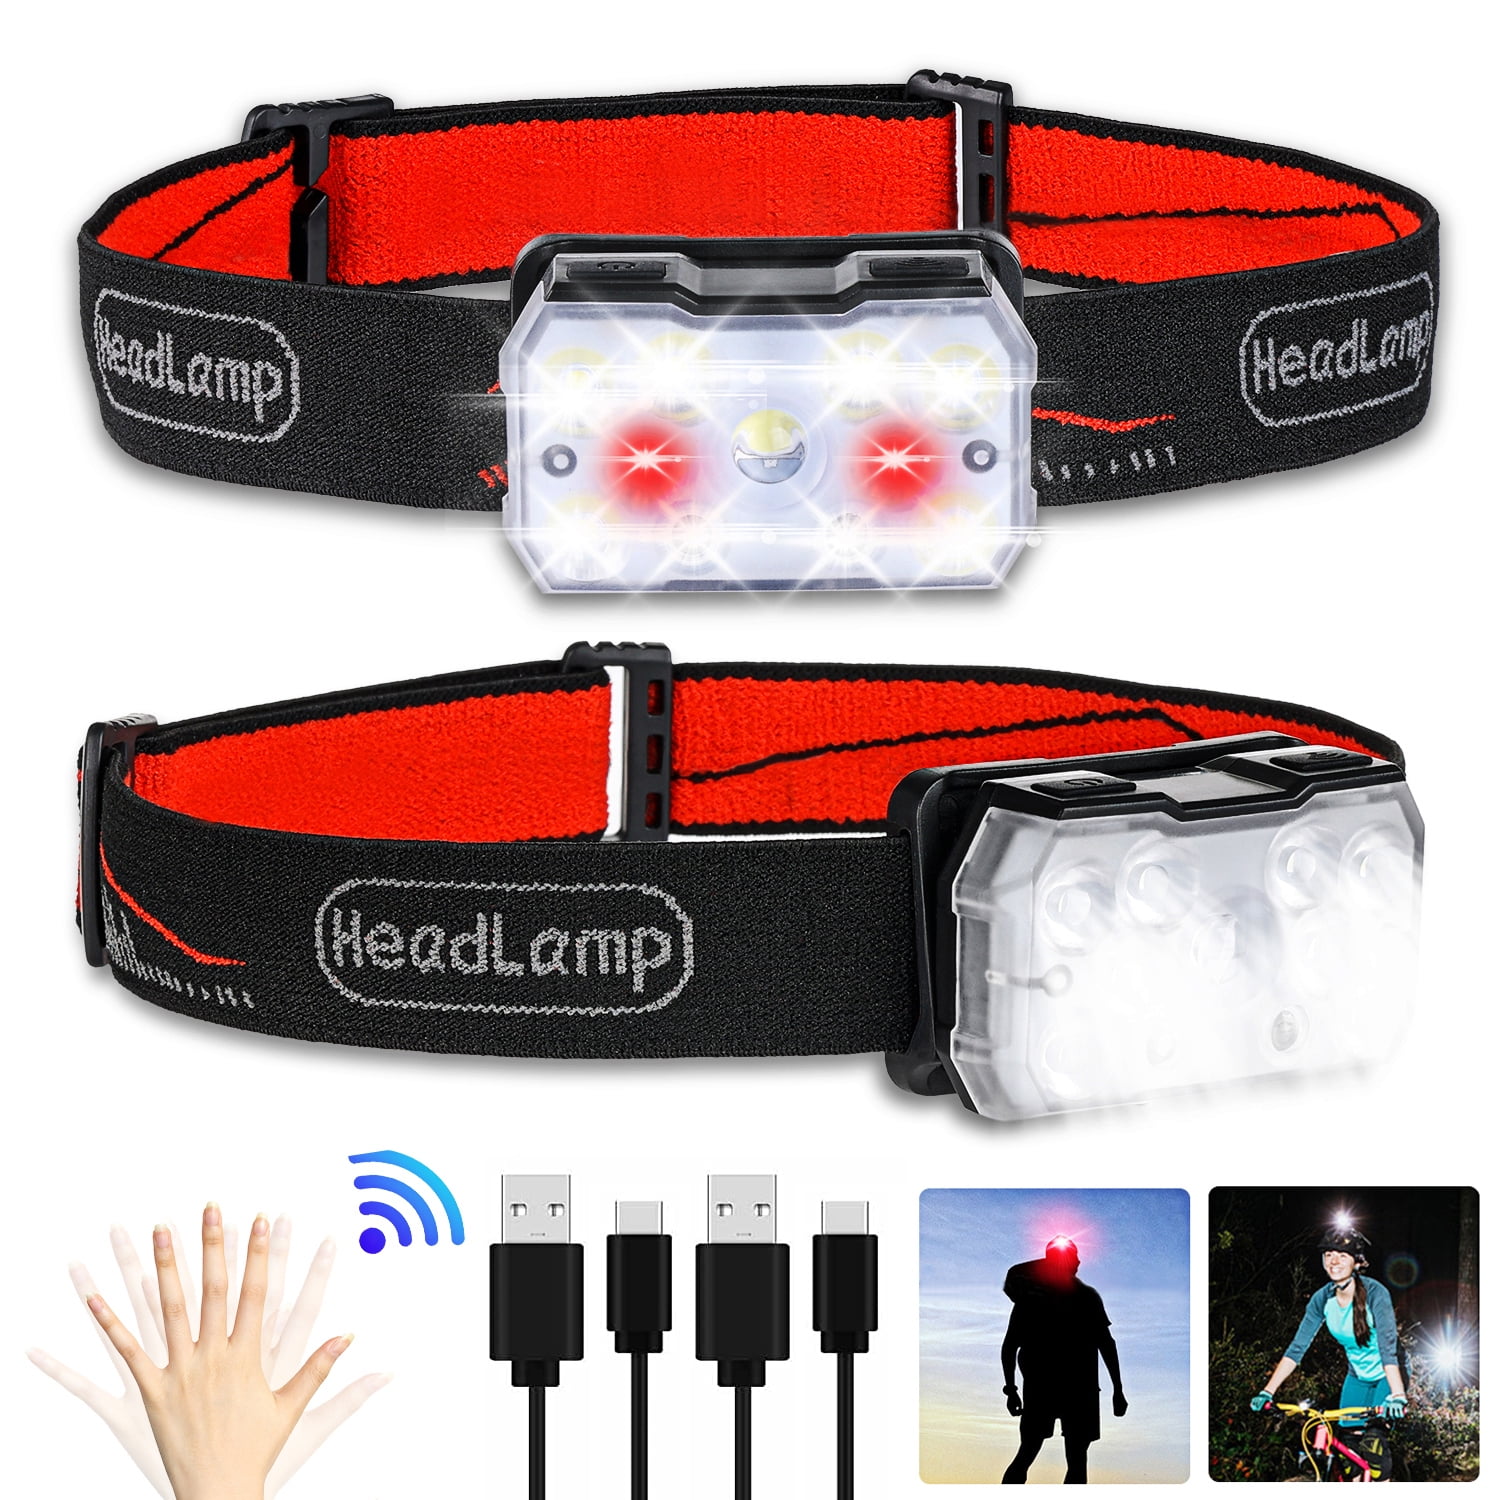 Rechargeable Headlamp, Zacro Pack Motion Sensor LED Head Lamp with  Modes, Adjustable Headband, Waterproof Headlight for Camping Hiking Cycling  Outdoor Sport